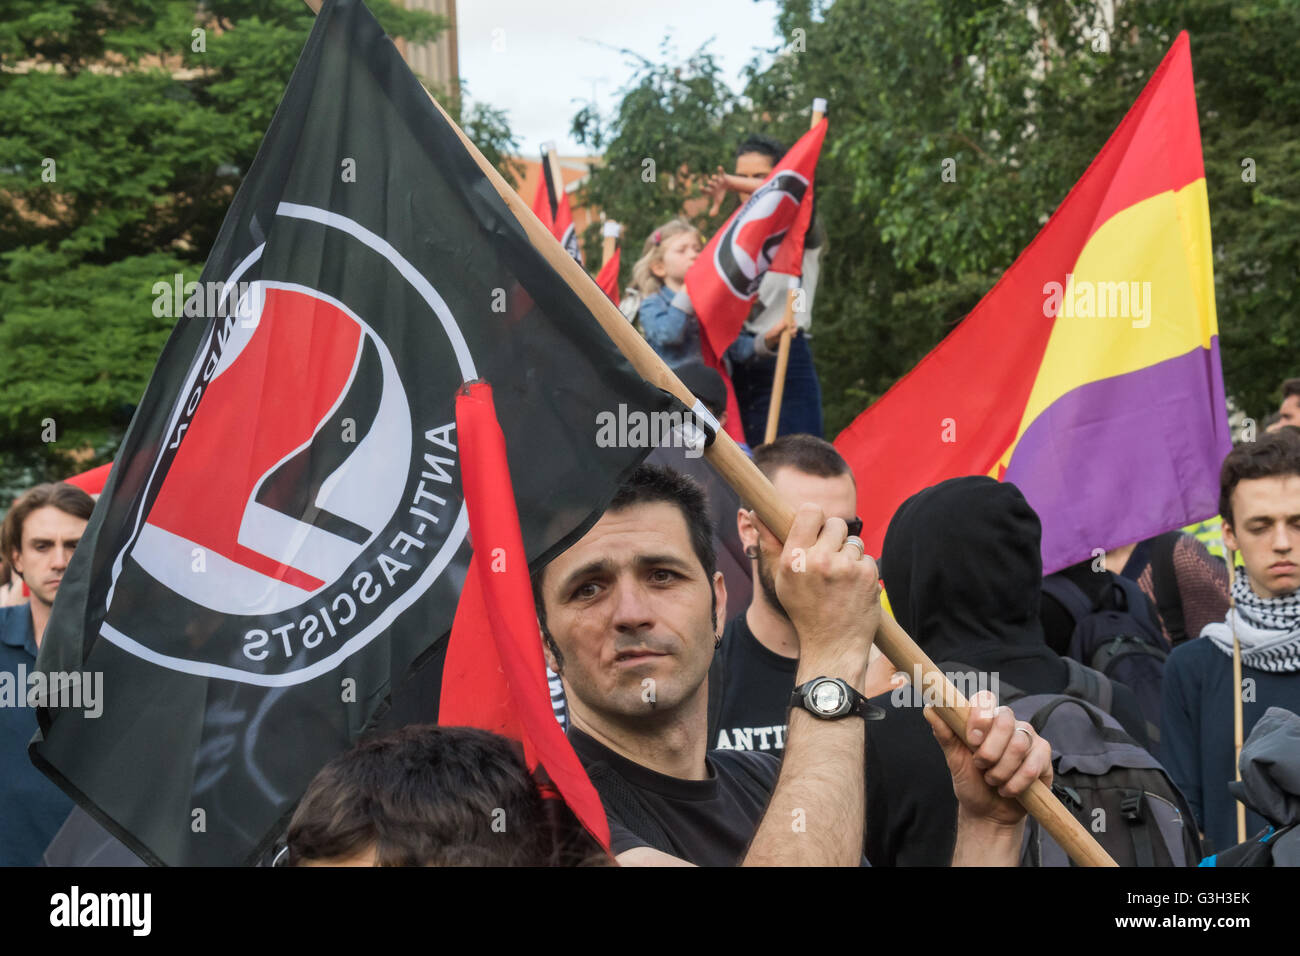 London, UK. June 24th 2016. Anti-fascist protesters with flags at the rally in Altab Ali Park on the day after the UK voted to leave the EU against racism, for migrant rights and against fascist violence. They say that migration and immigrants have been attacked and scapegoated not only by both Remain and Leave campaigns but by mainstream parties and media over more than 20 years, stoking up hatred by insisting immigrants are a 'problem'.Peter Marshall/Alamy Live News Stock Photo